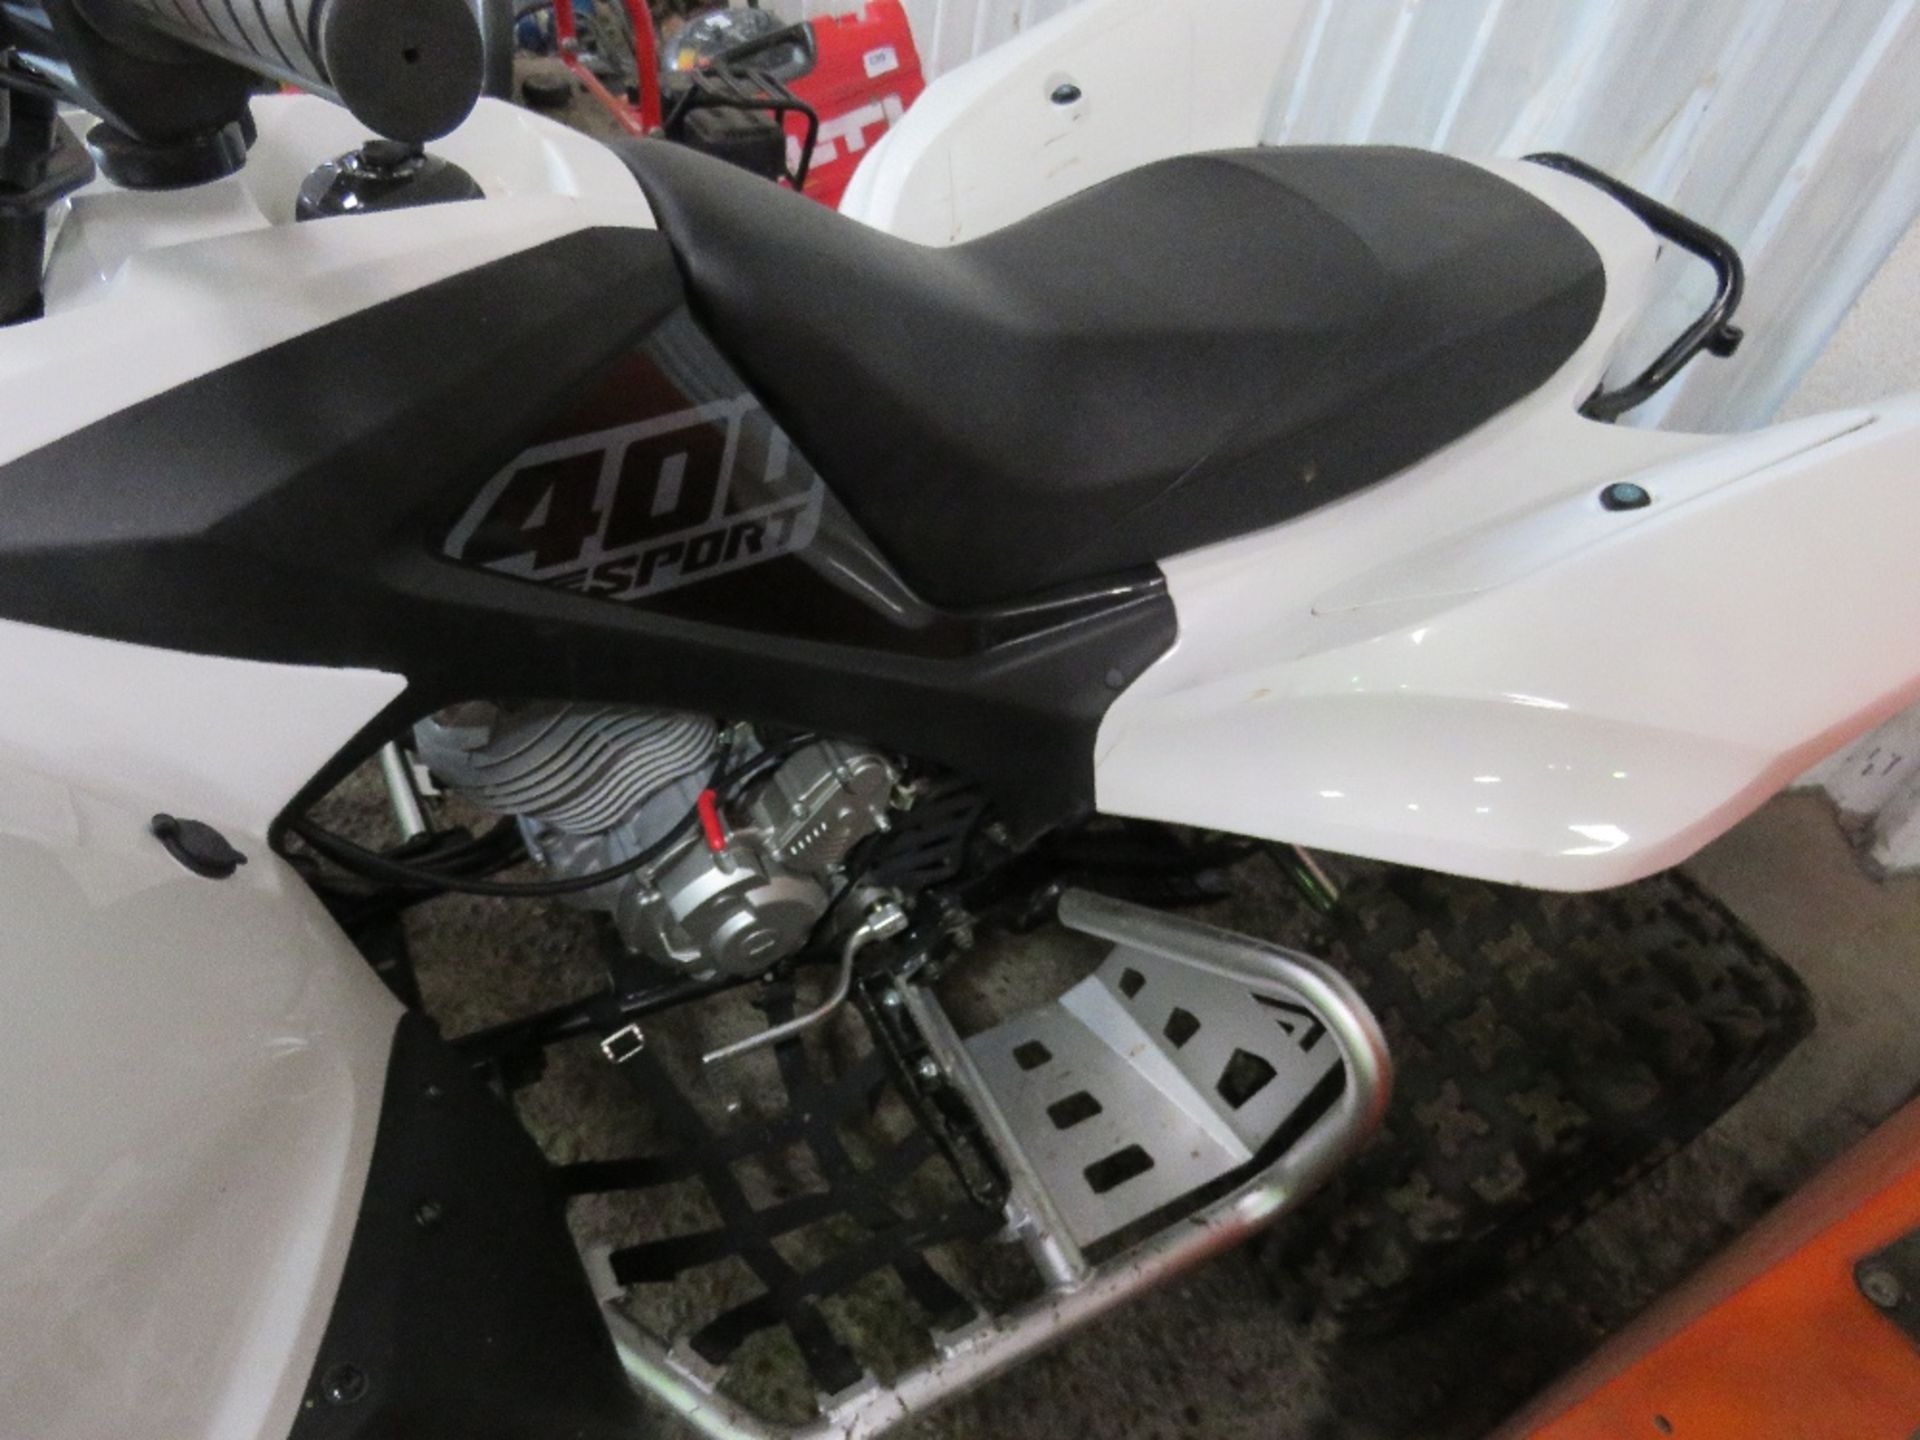 AEON 400 SPORT/ QUADZILLA RACING QUAD BIKE. 1MILE FROM NEW, UNWANTED GIFT. - Image 3 of 7